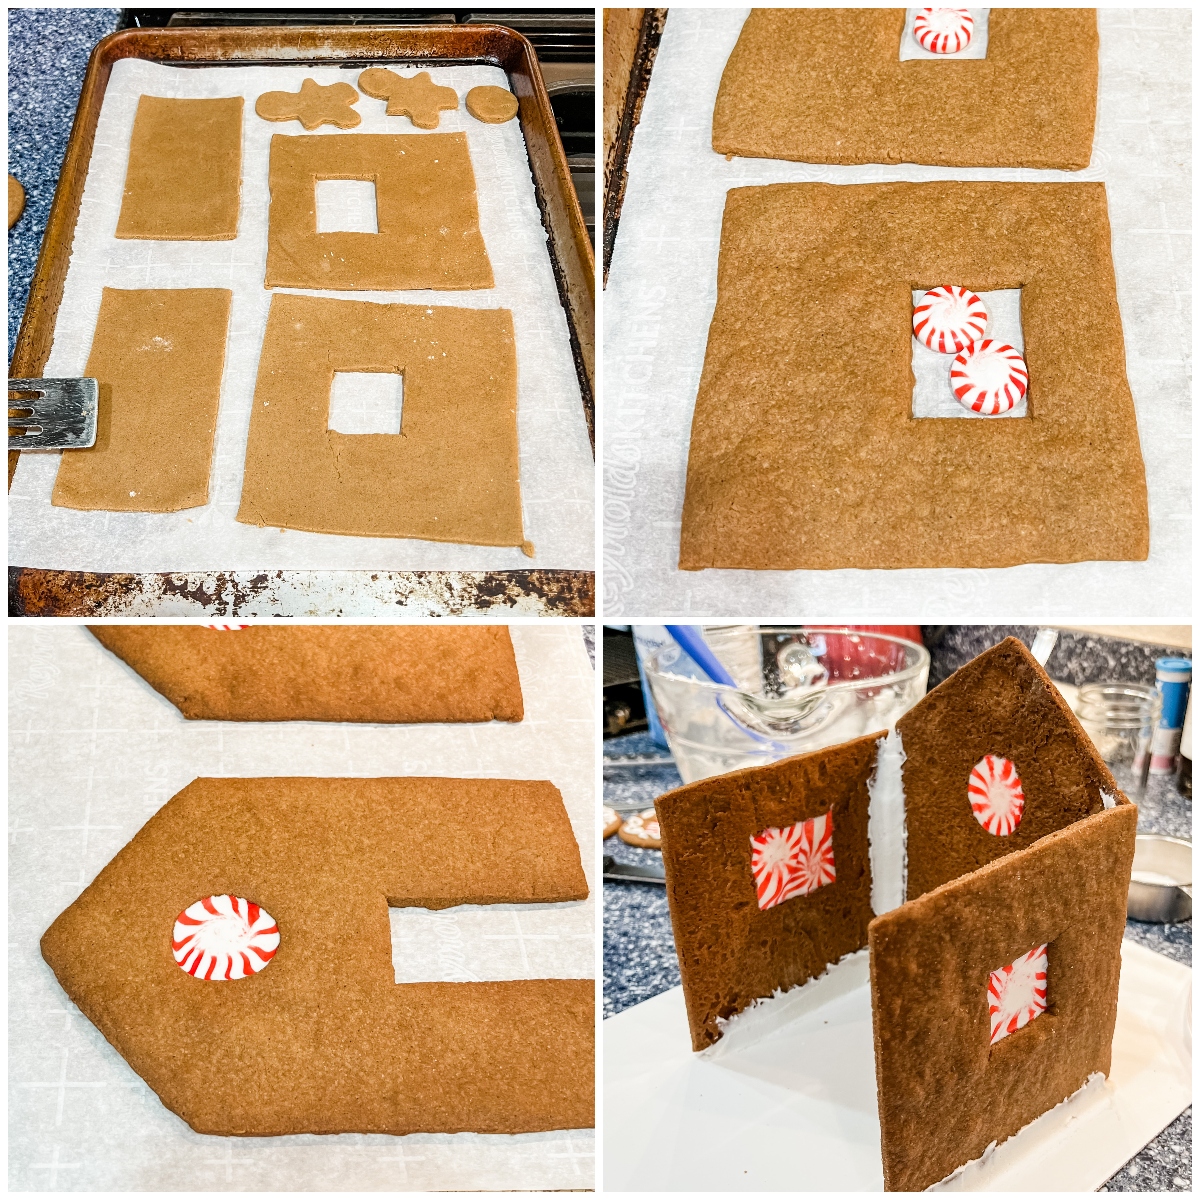 photo collage showing steps to make gluten free gingerbread house